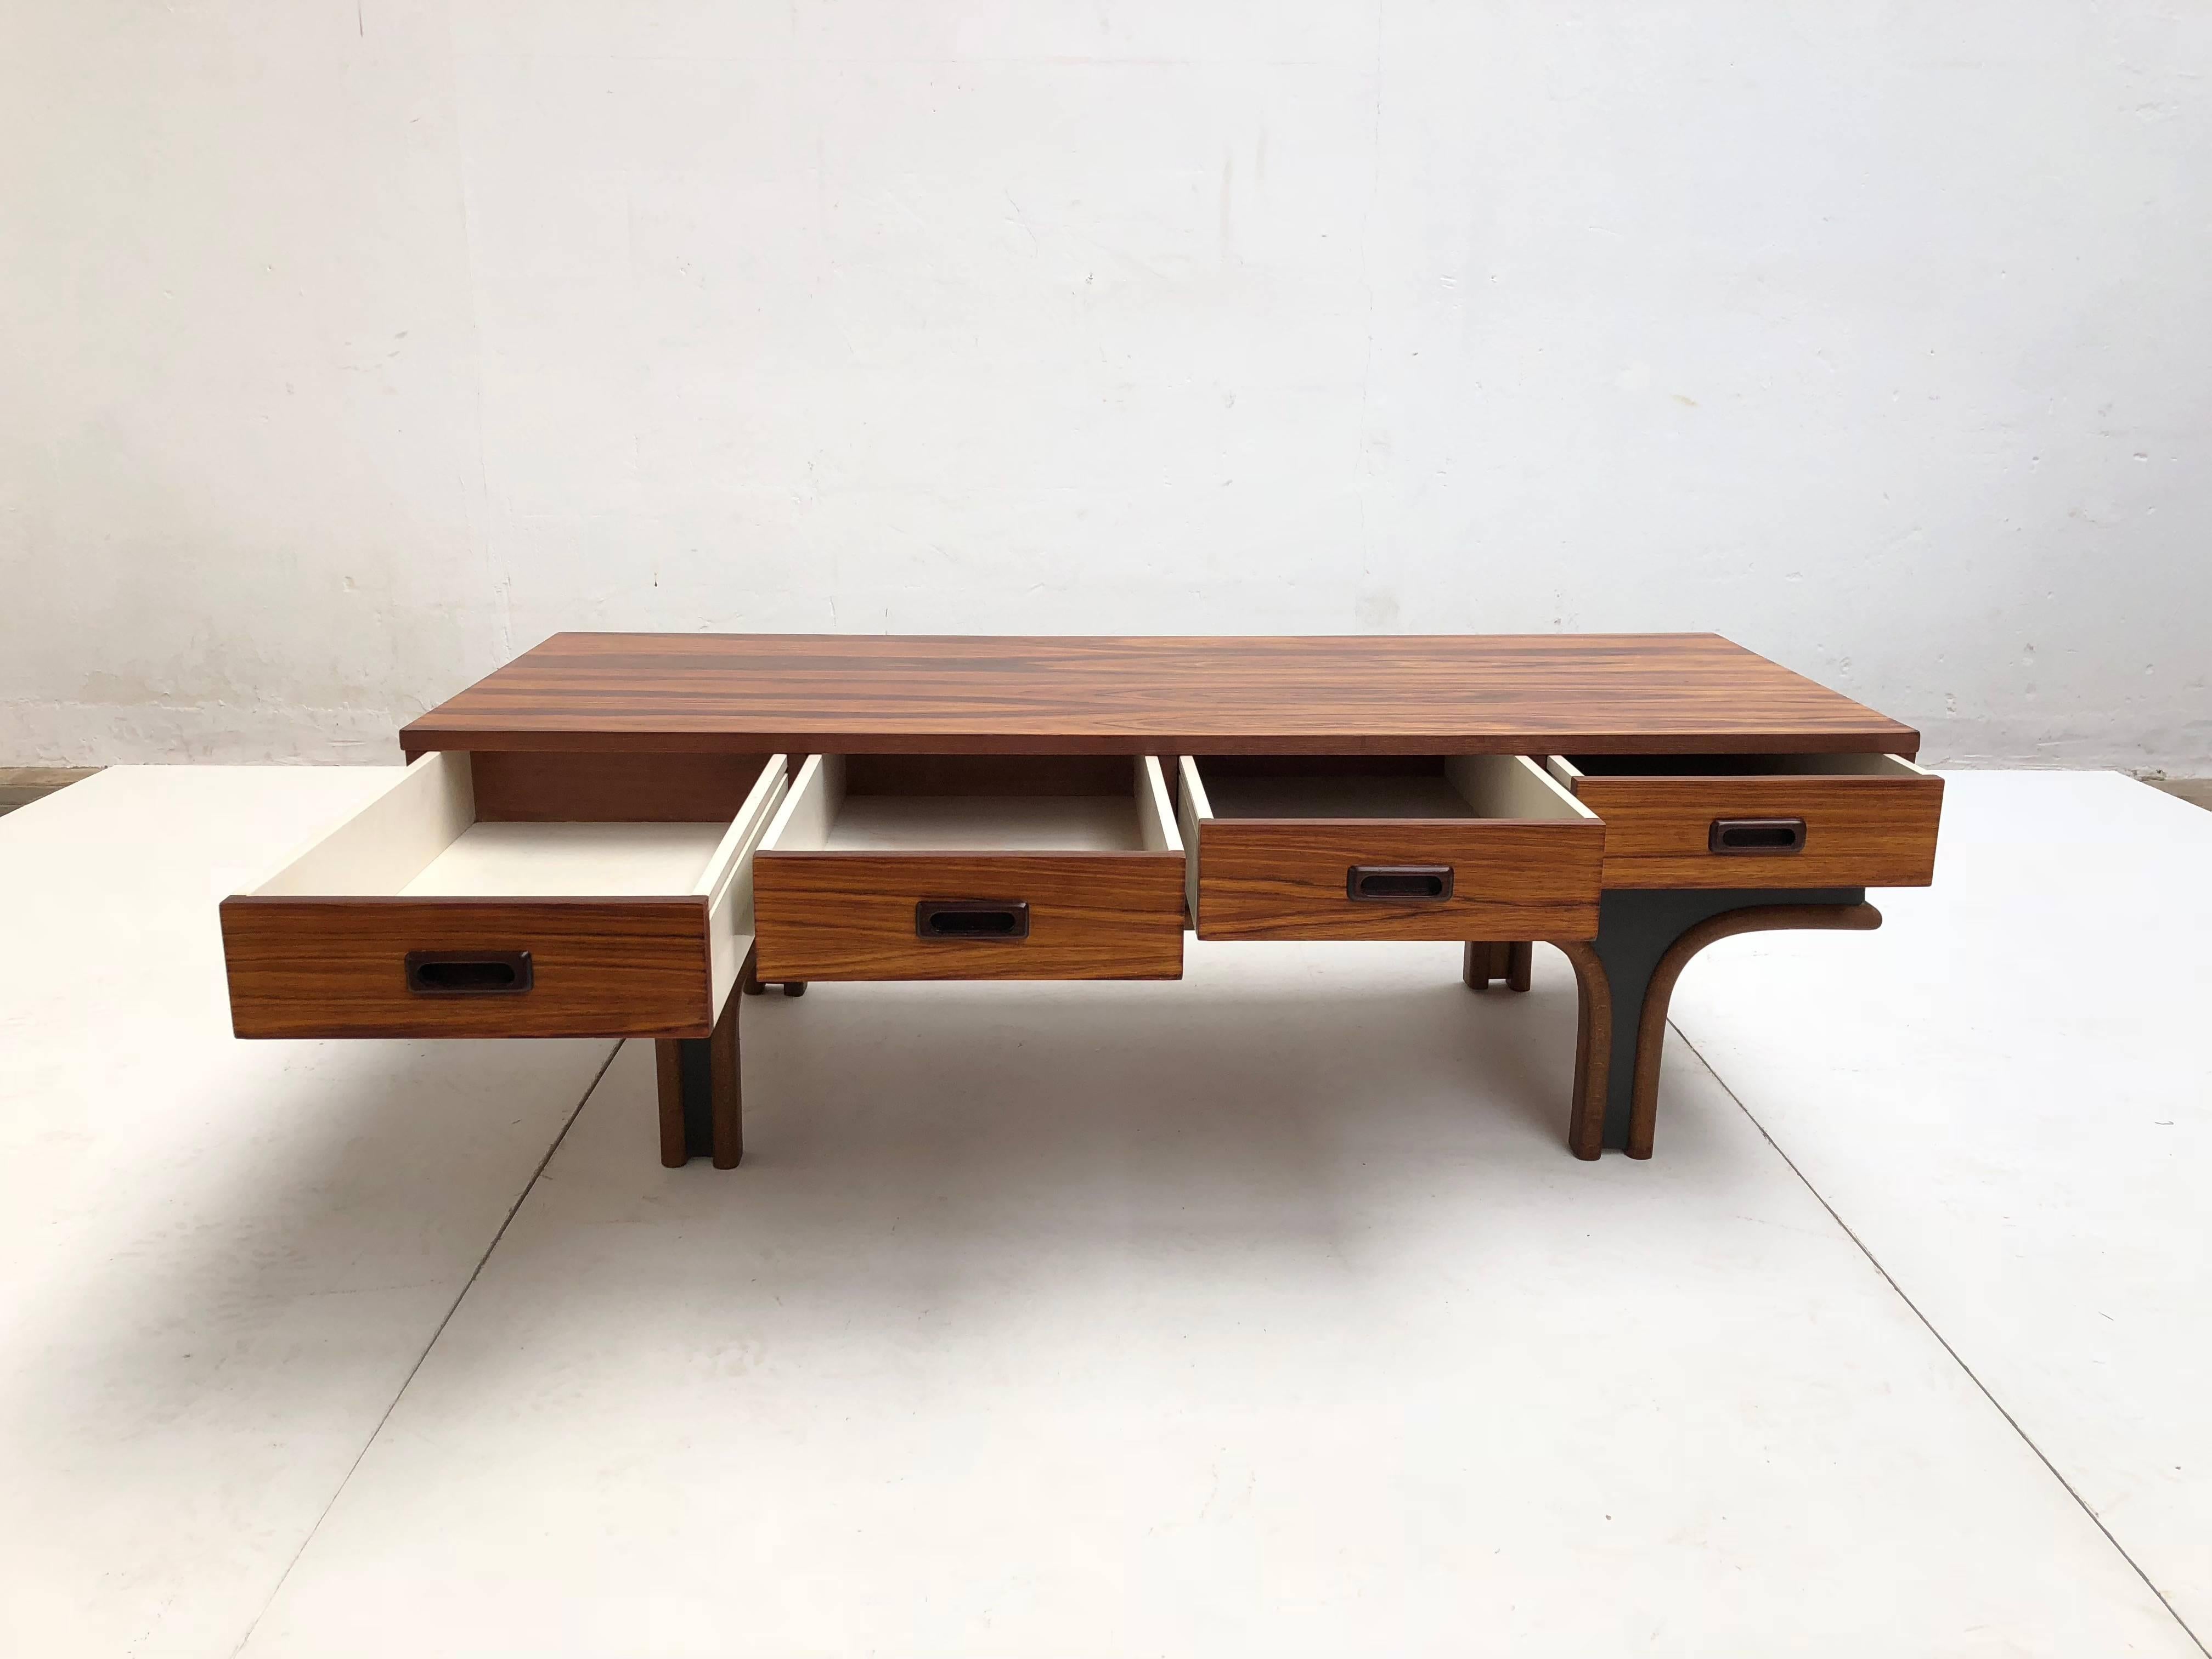 Mid-20th Century Gianfranco Frattini Style Low Table, Credenza in Mahogany, Birch & Leather 1960s